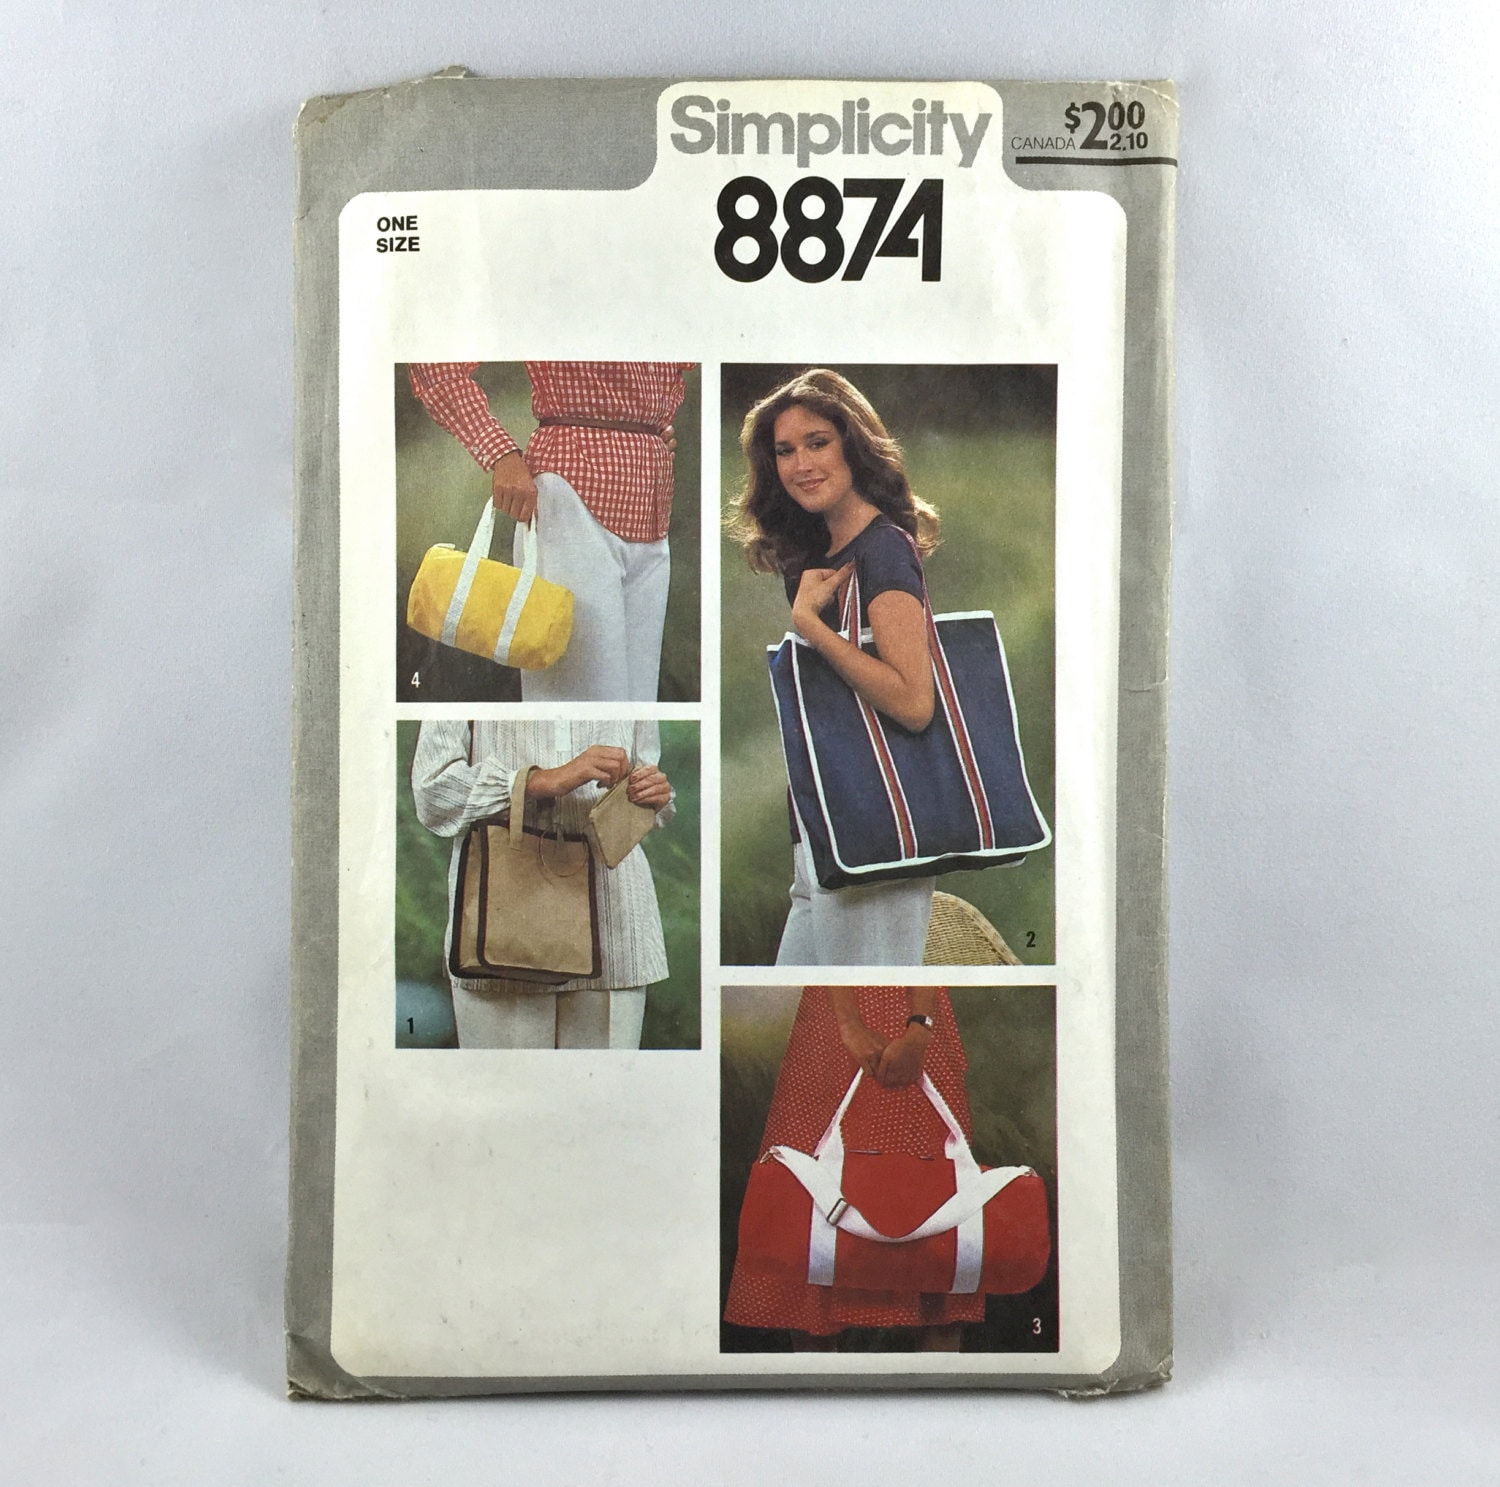 ... Simplicity 8874 TOTE BAGS Pattern Overnight Bag, Duffle Bags Totes FF